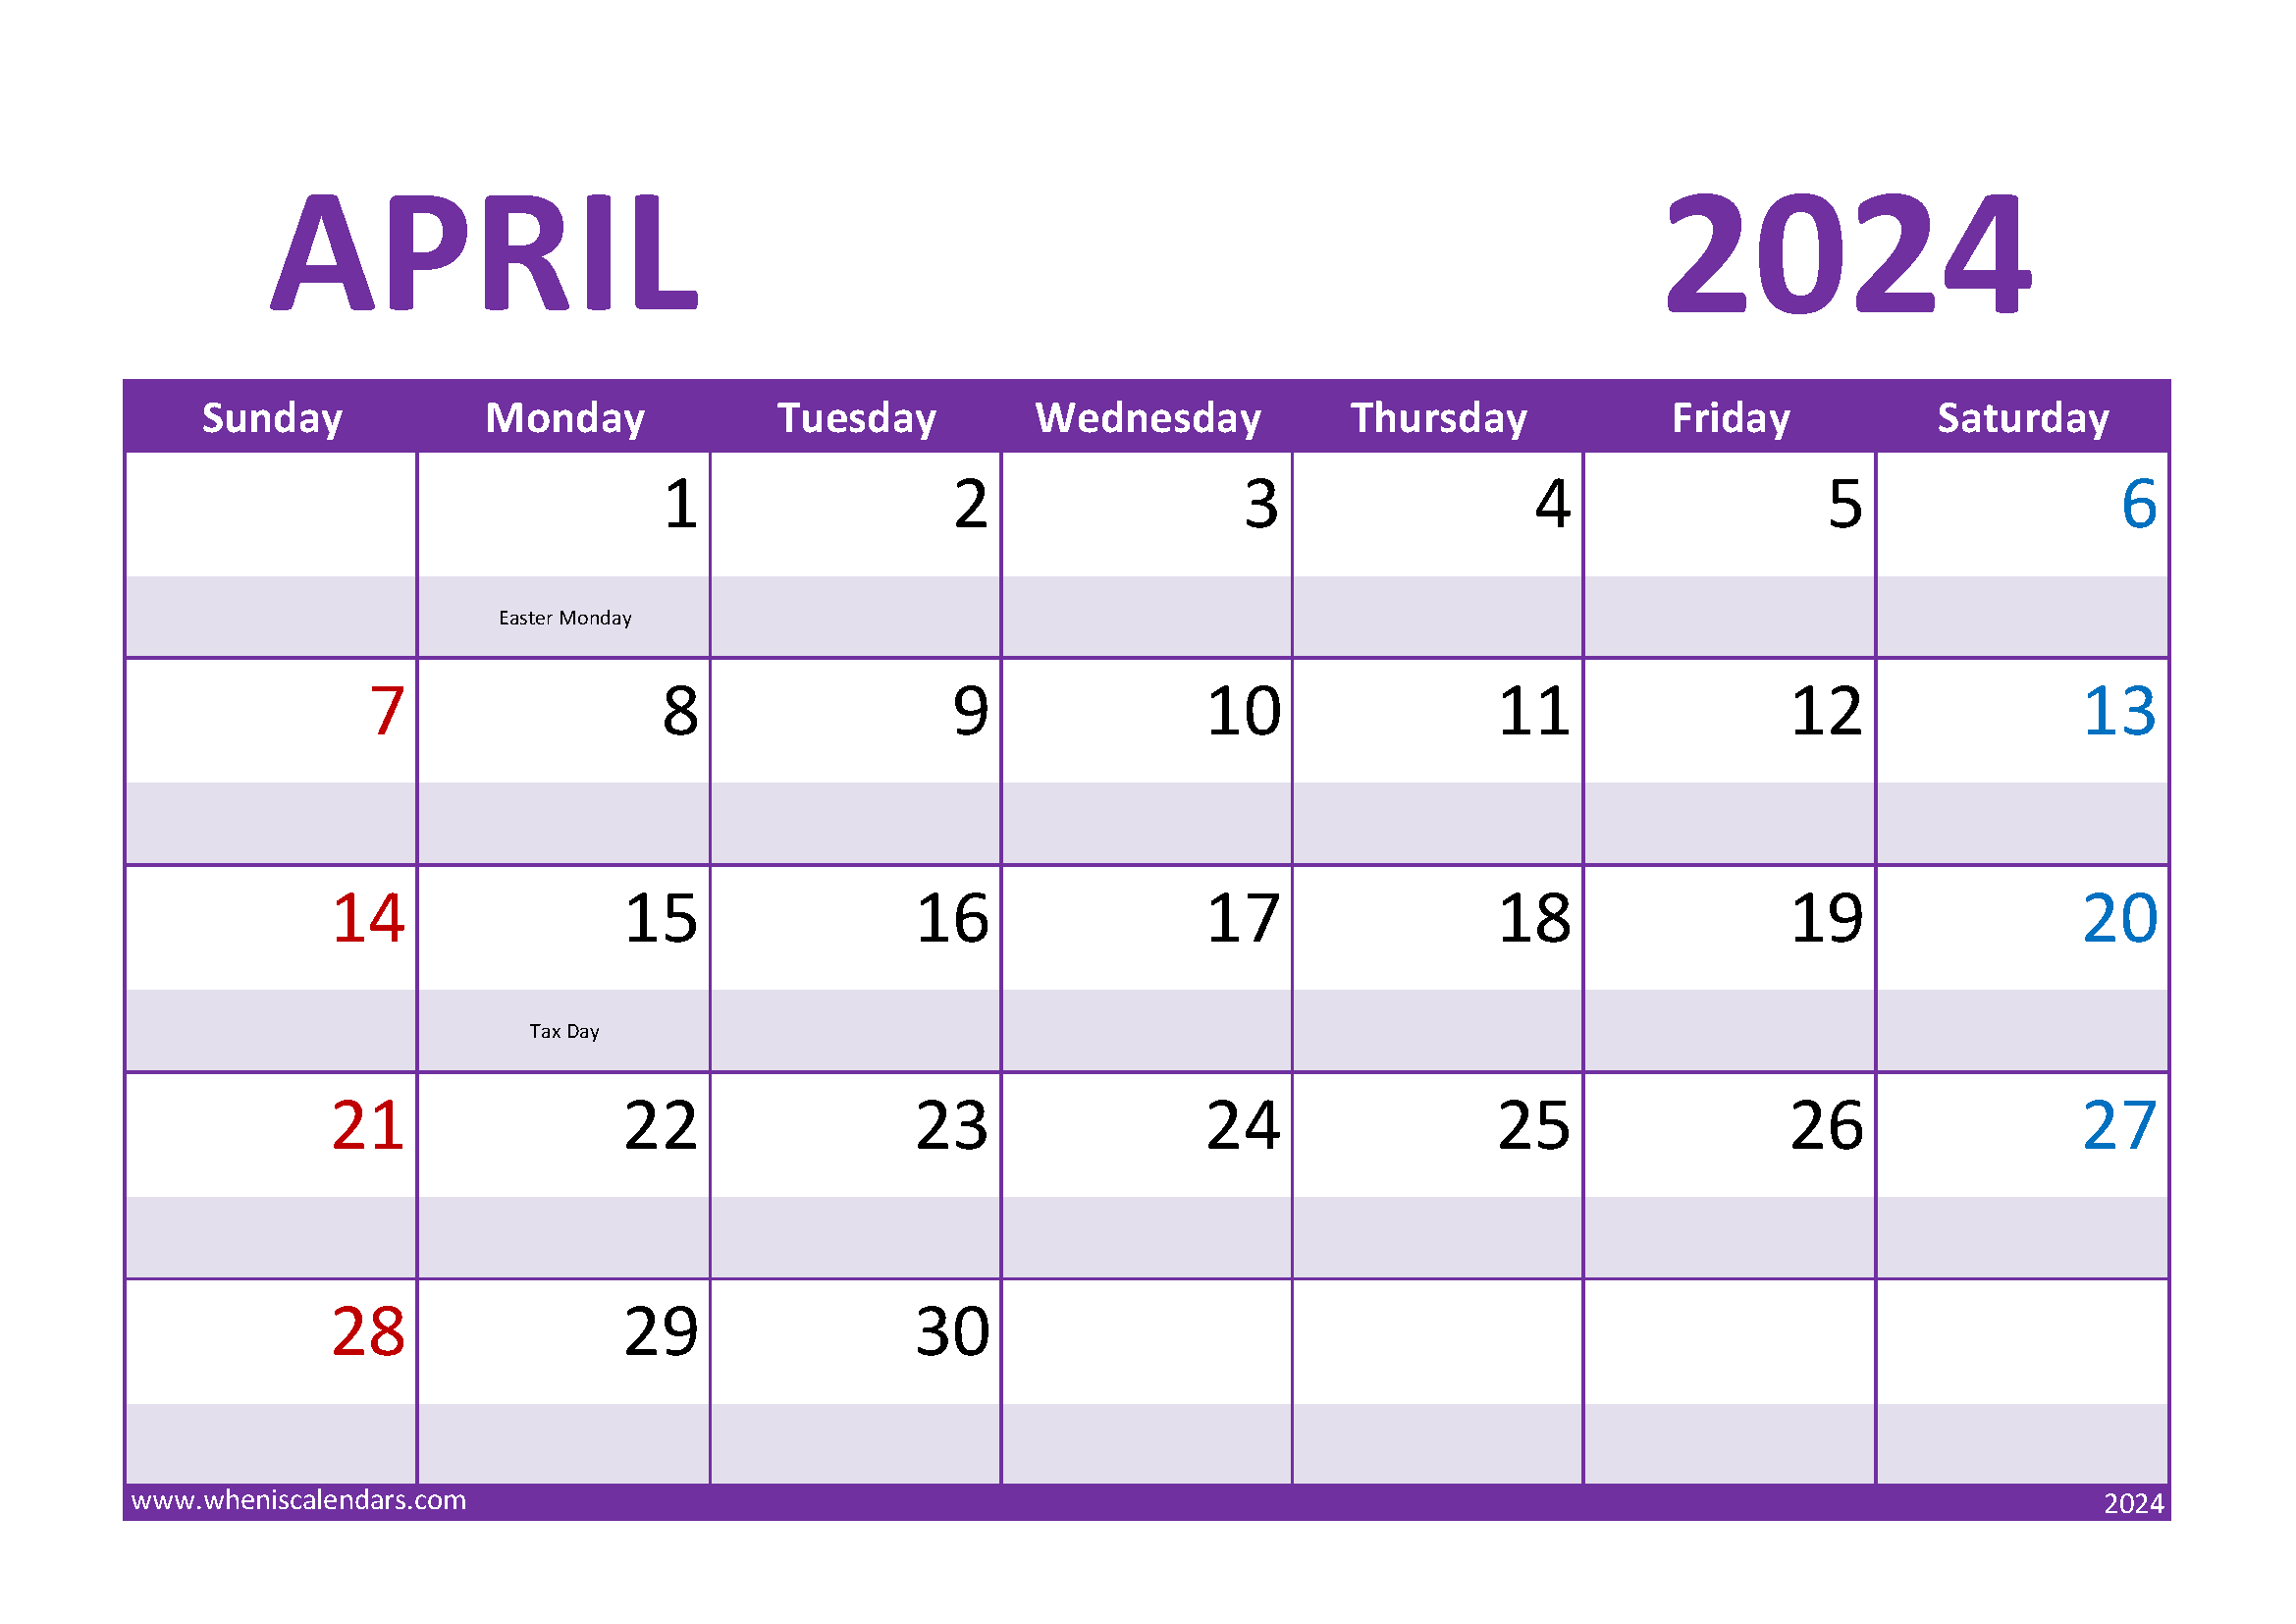 May Calendar 2024 with Holidays